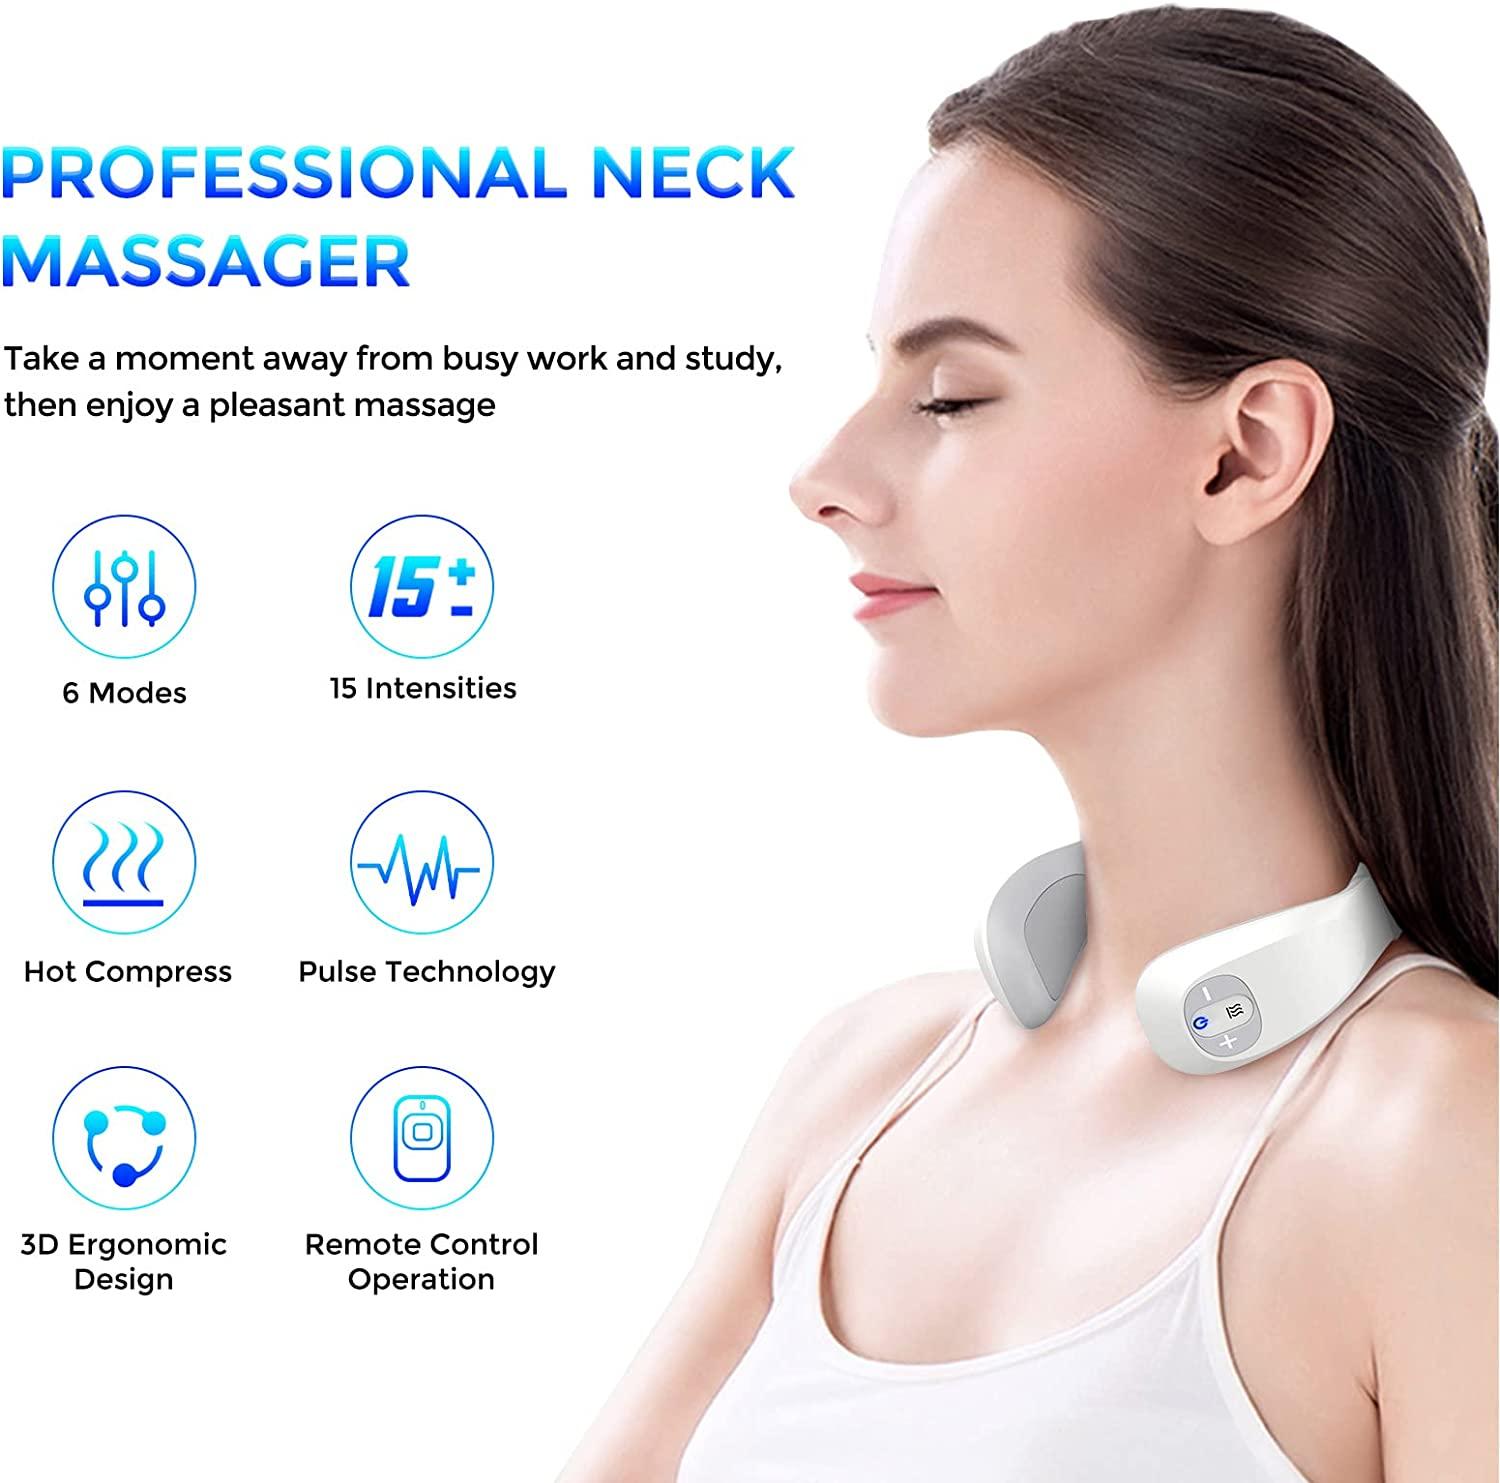 Neck Massager with Heat, Intelligent Neck Massage for Pain Relief